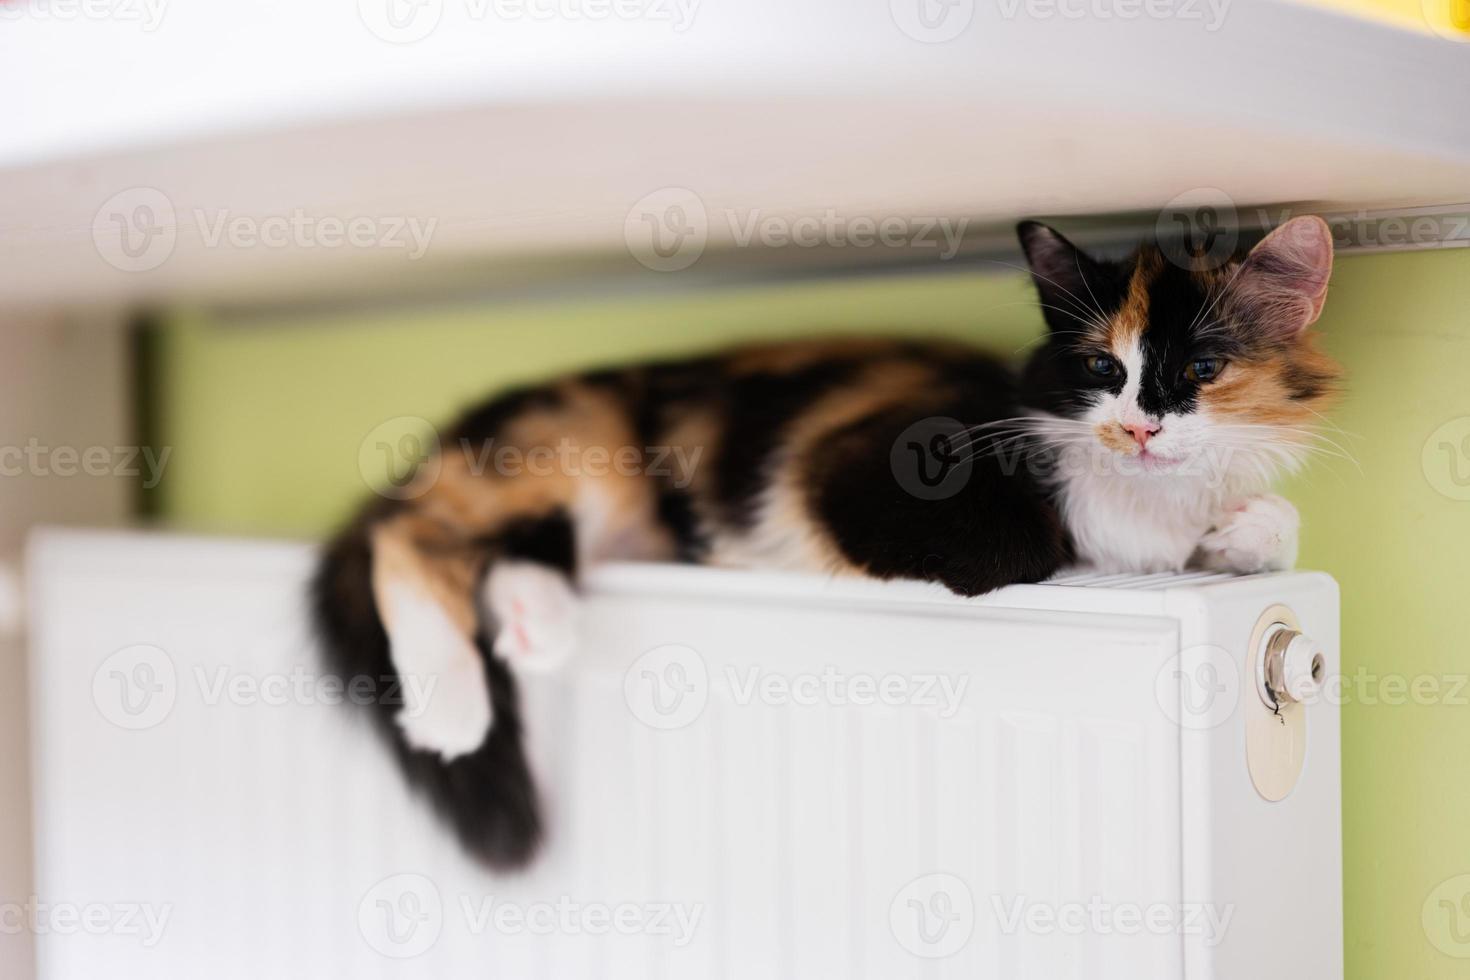 Cat lies on a heating radiator on a cold day. photo